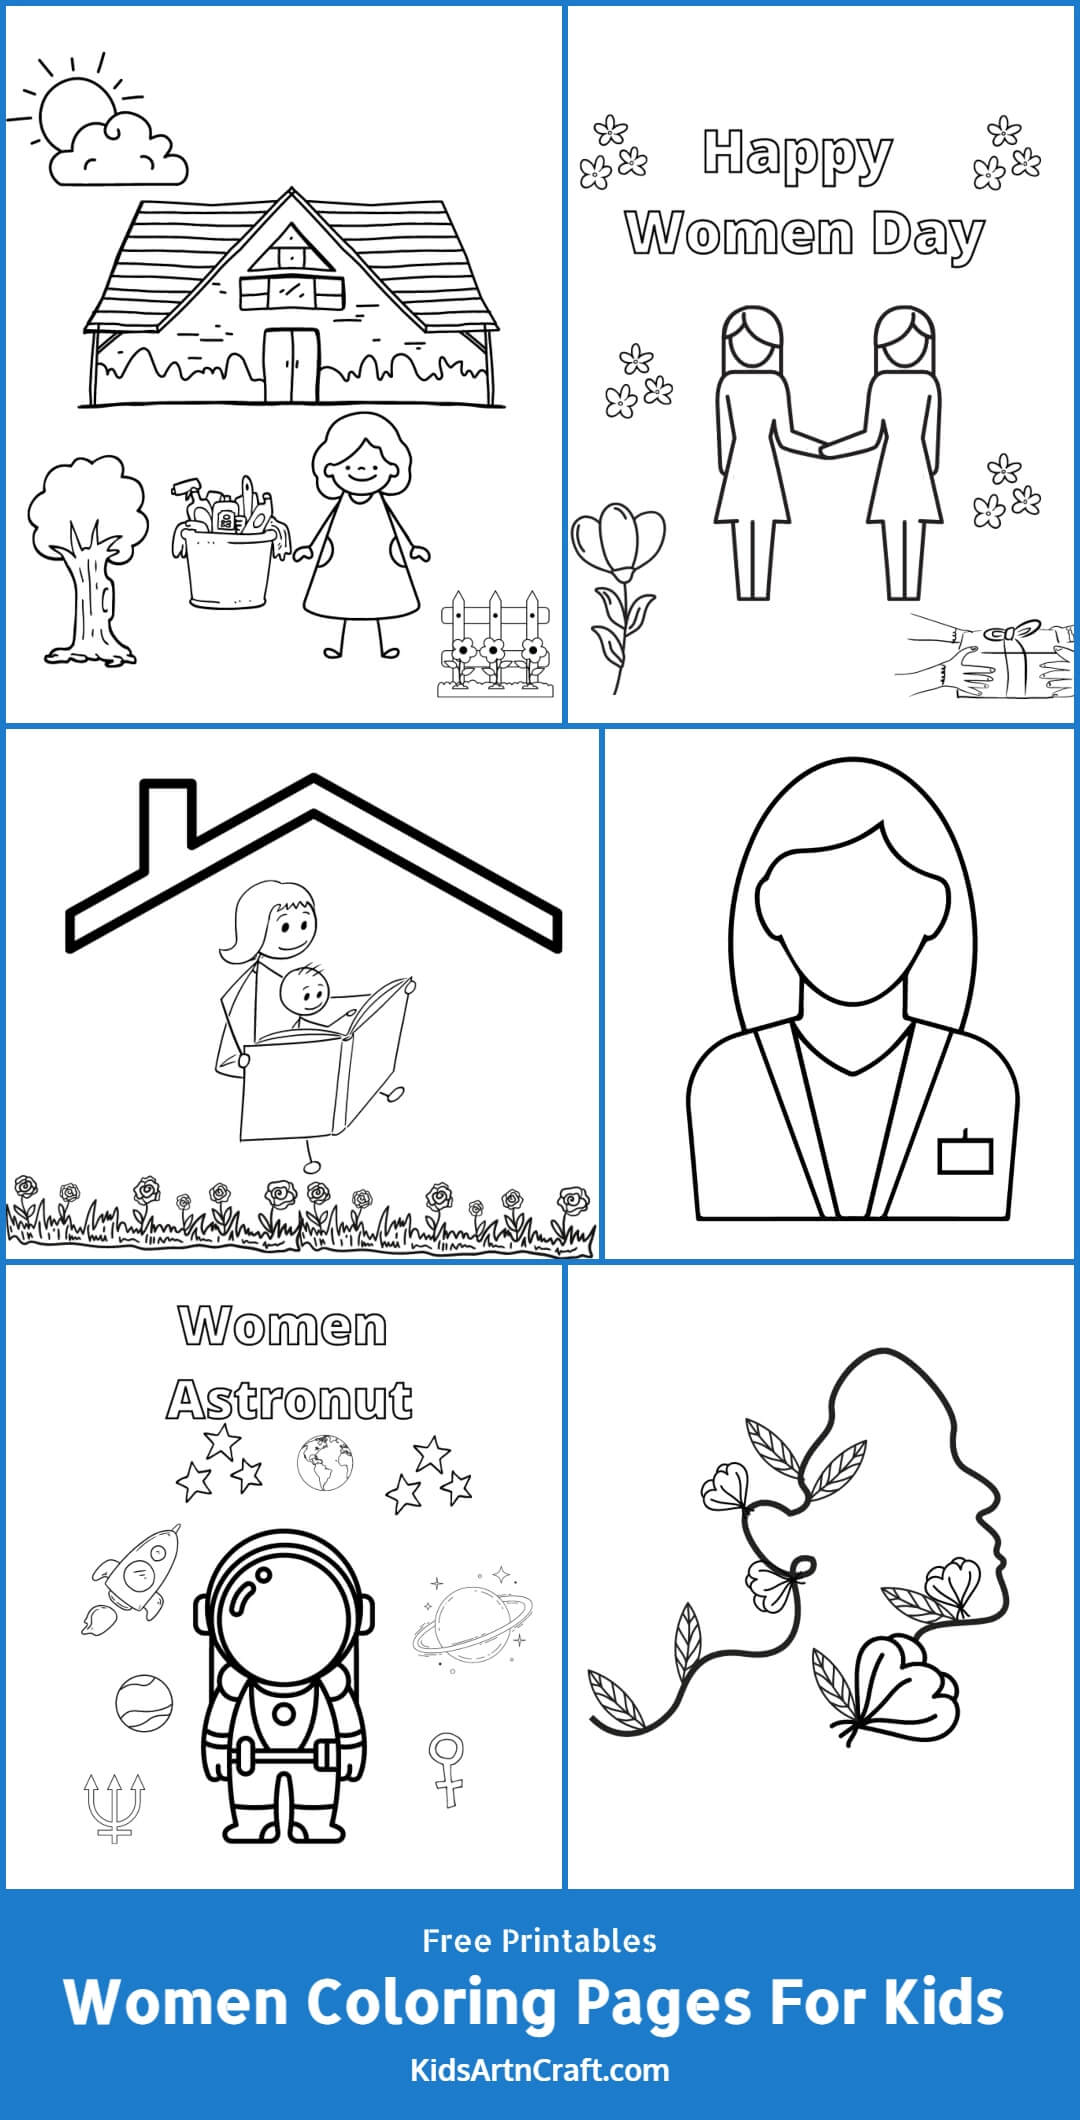 Women Coloring Pages For Kids – Free Printables